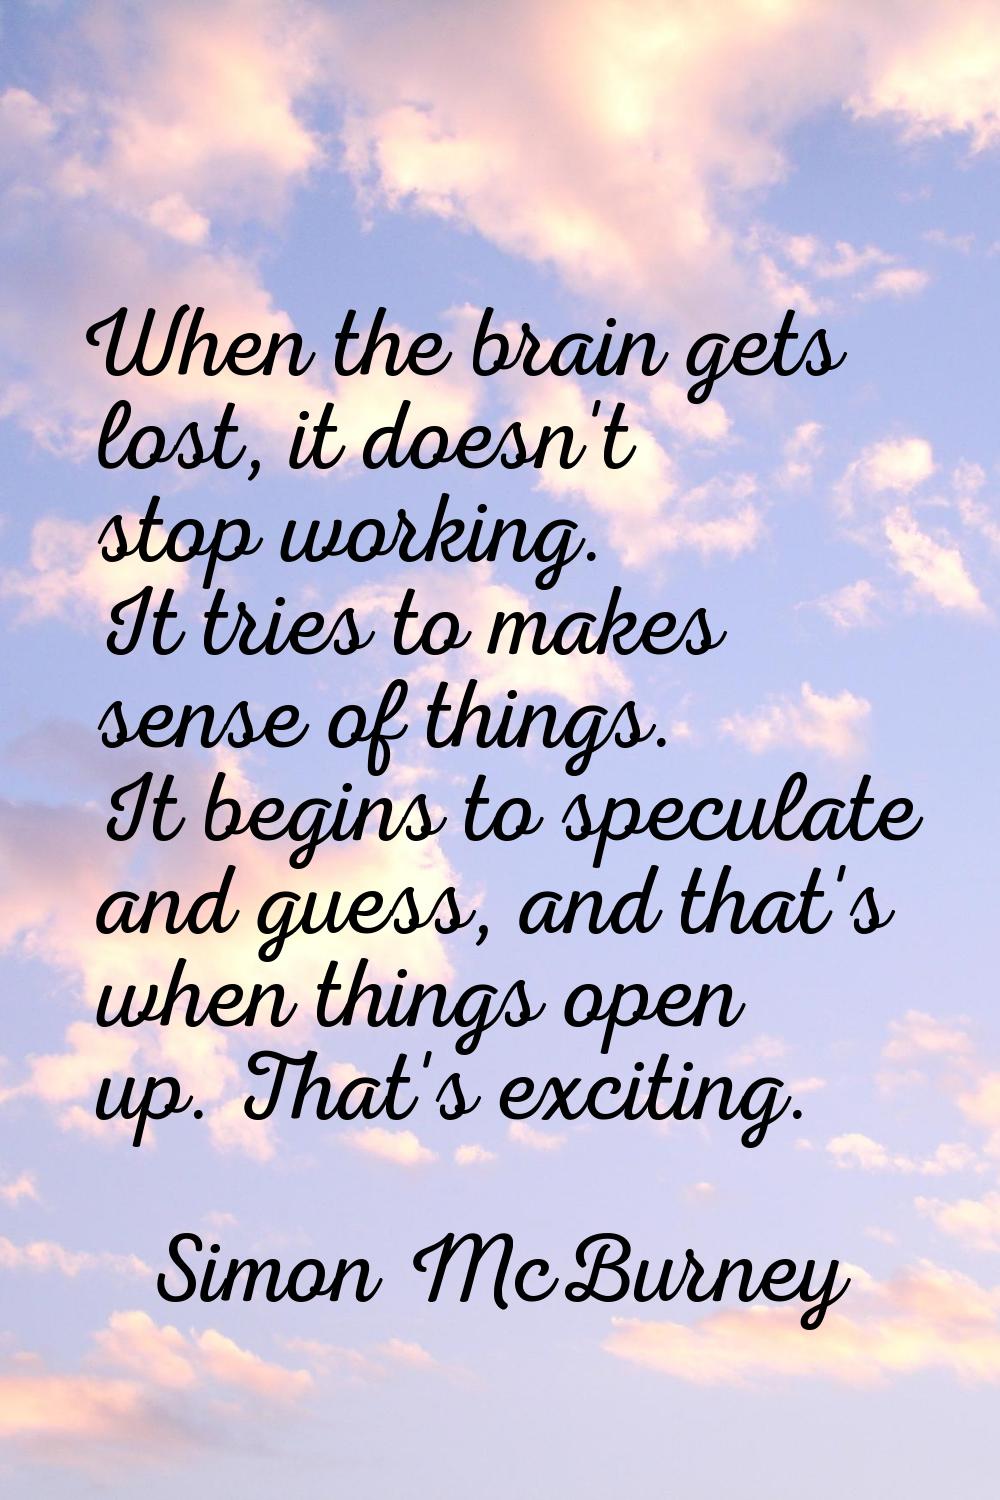 When the brain gets lost, it doesn't stop working. It tries to makes sense of things. It begins to 